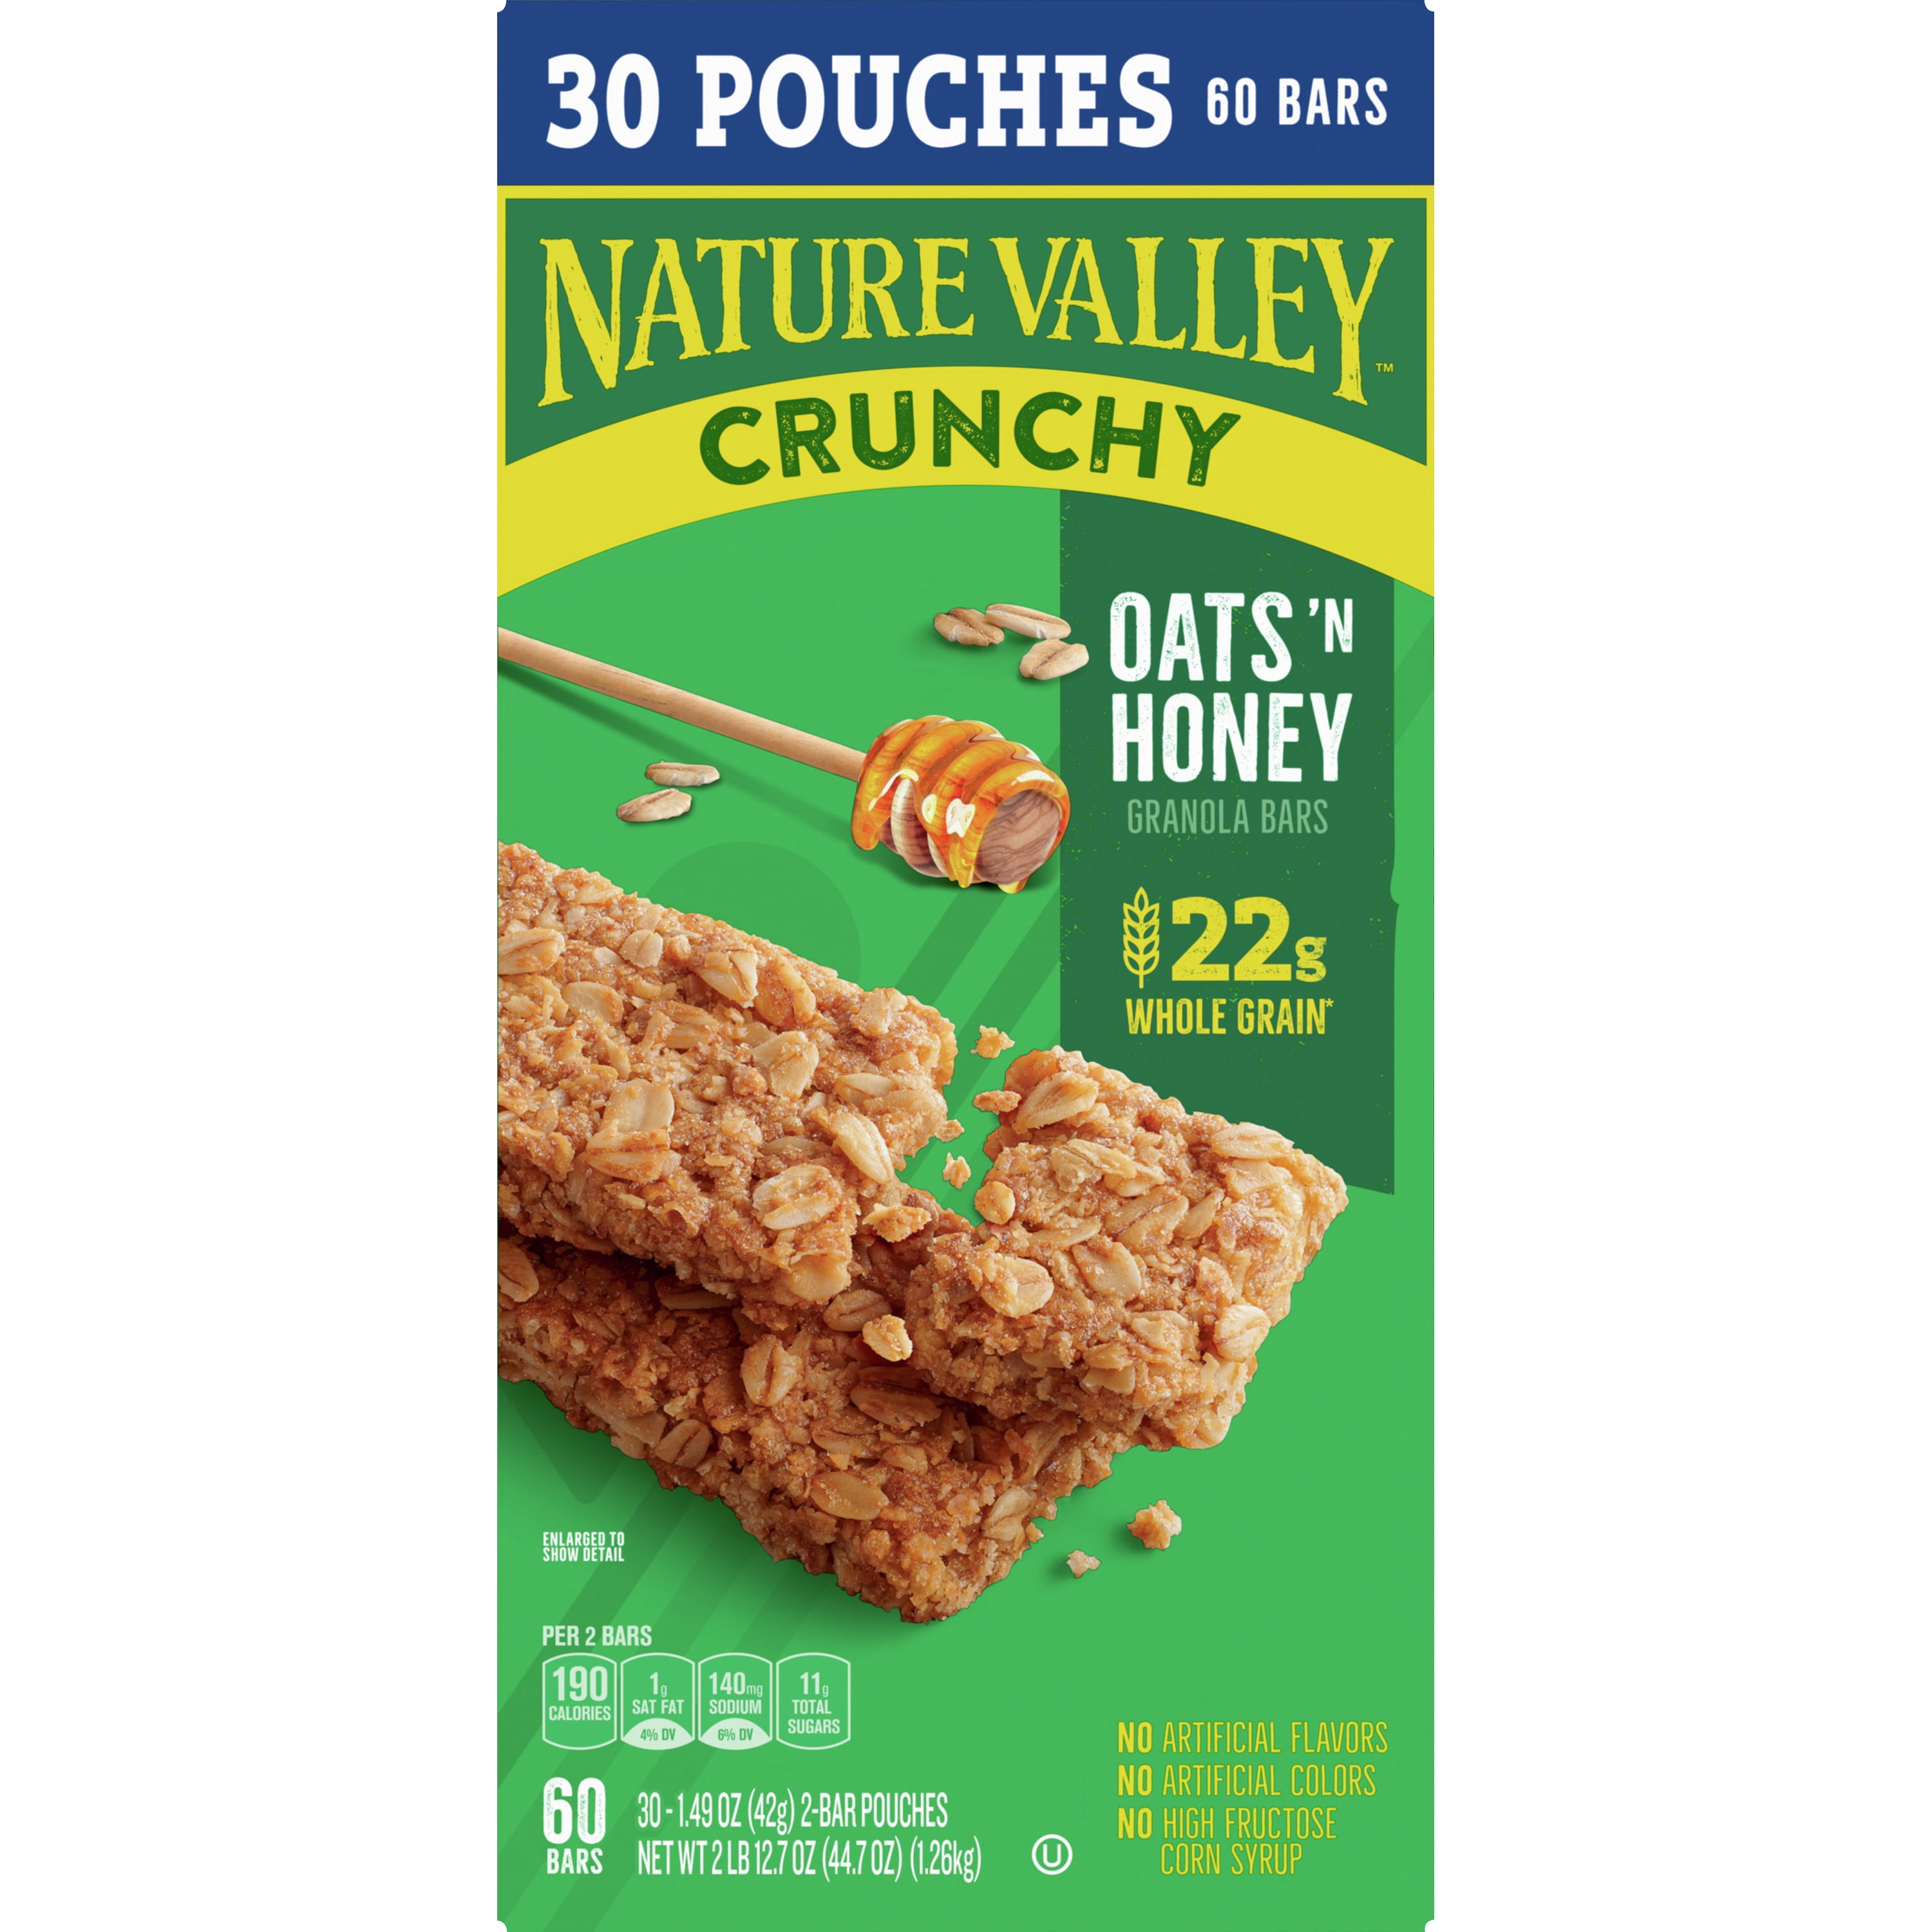  Nature Valley Crunchy Granola Bars, Oats 'n Honey, 12 Bars,  8.94 OZ (6 Pouches) : Grocery & Gourmet Food